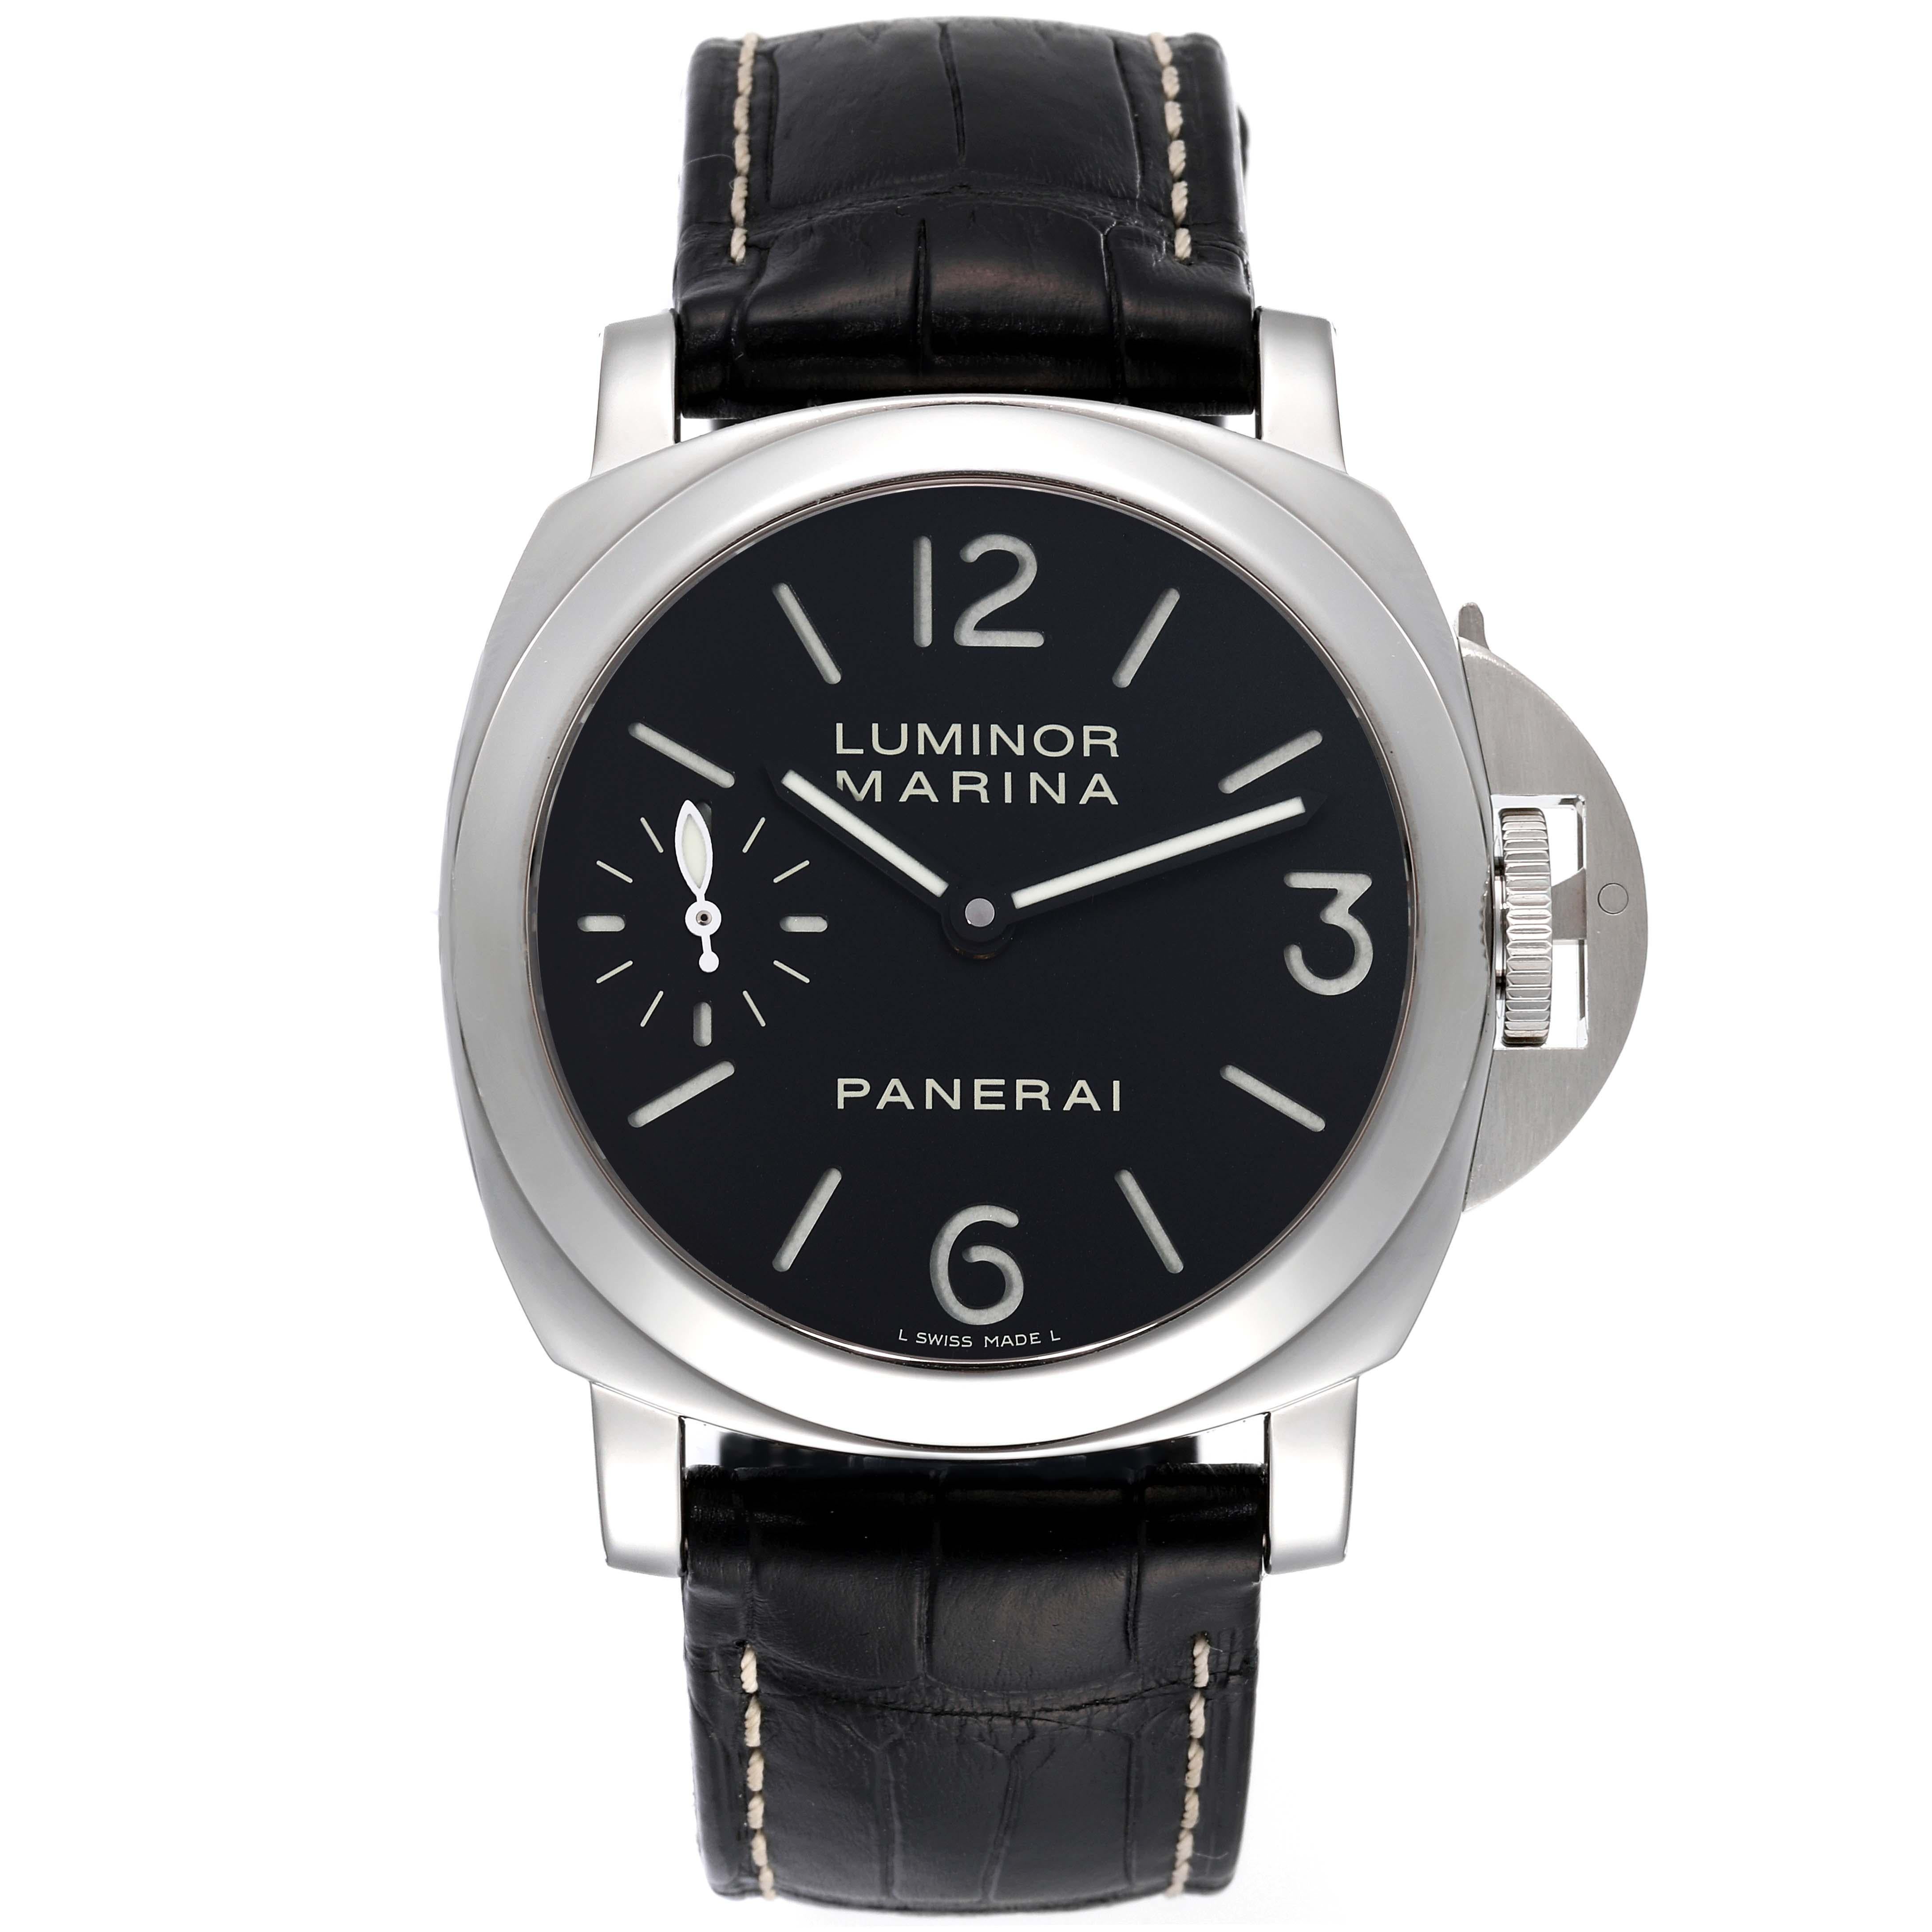 Panerai Luminor Marina 44mm Black Dial Steel Mens Watch PAM00111. Manual-winding movement. Two part cushion shaped polished stainless steel case 44.0 mm in diameter. Panerai patented crown protector. Transparrent case back. Polished stainless steel